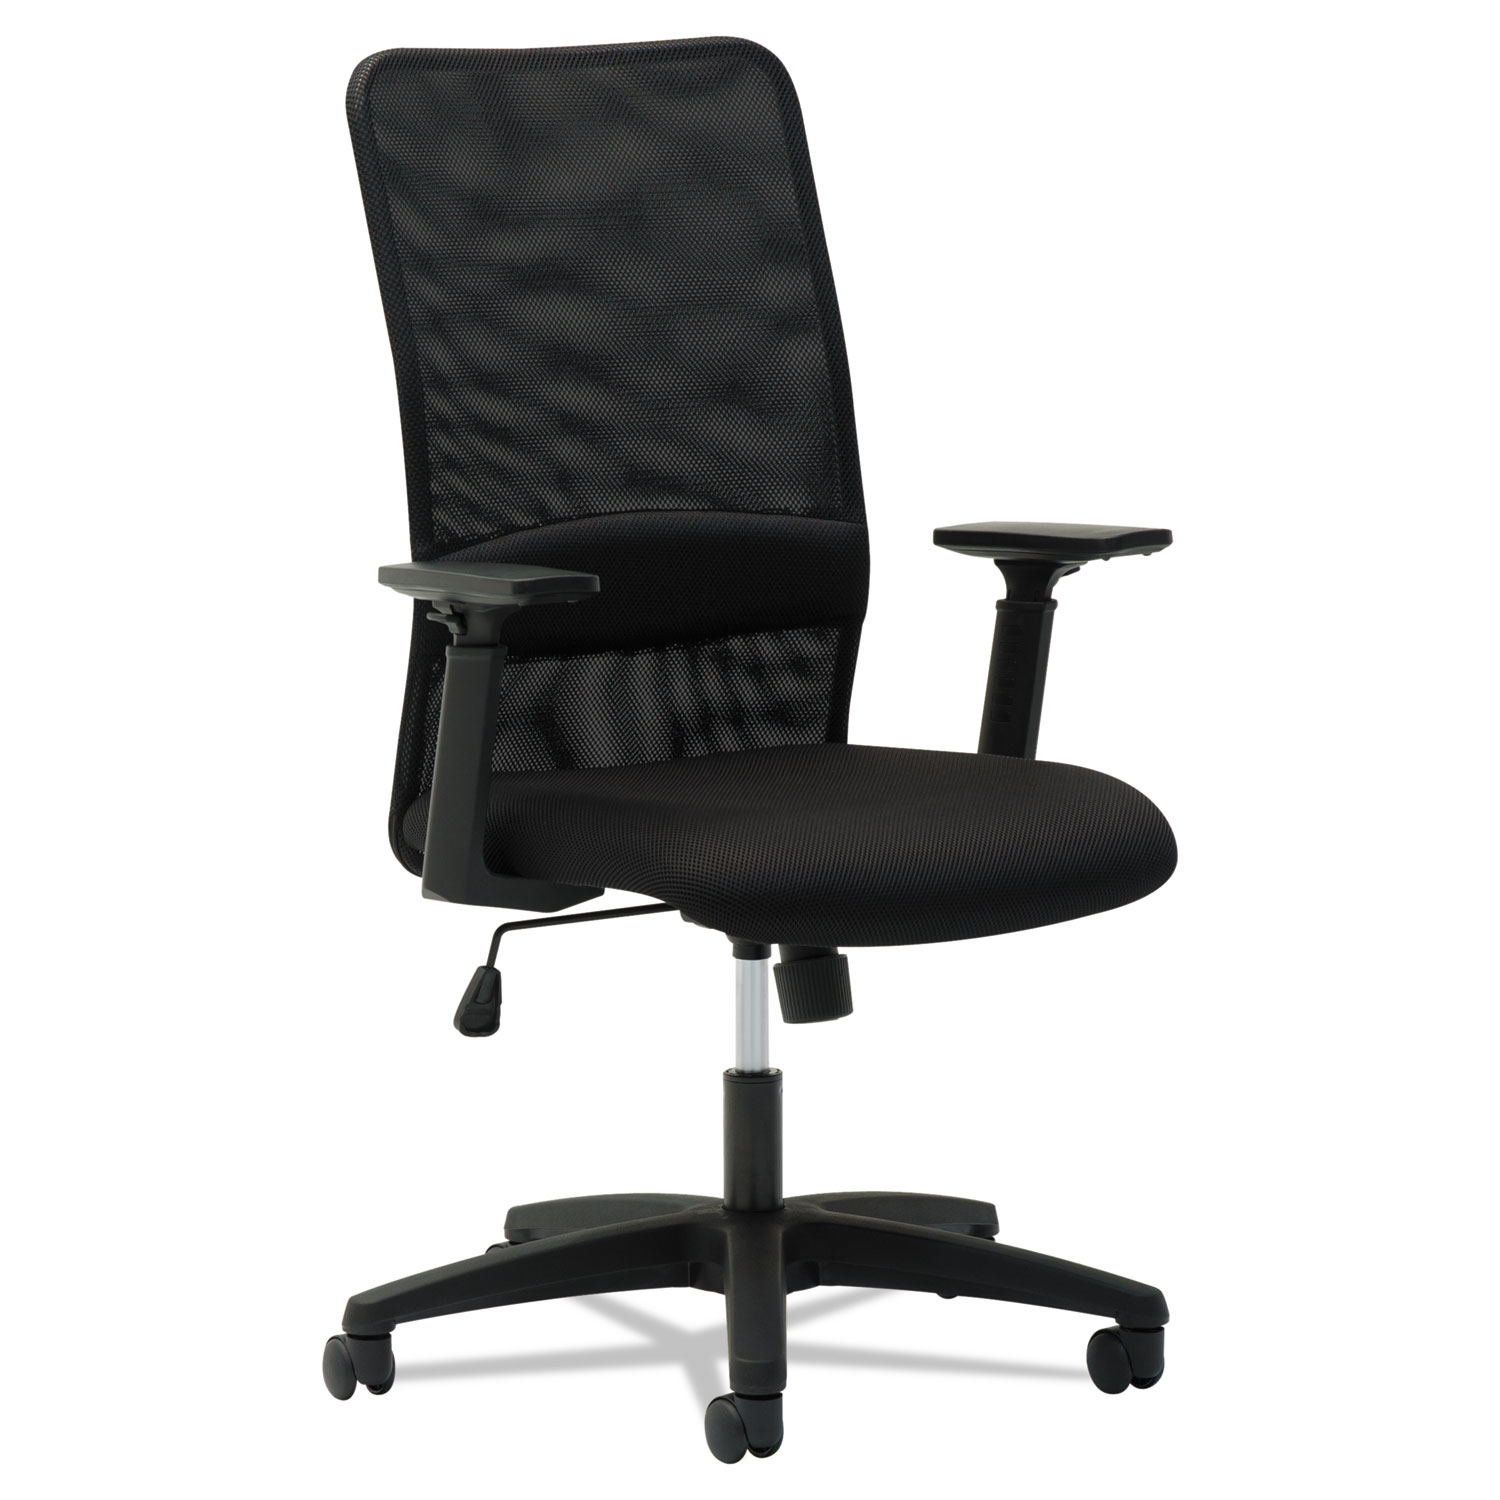 Mesh High-Back Chair, Supports up to 225 lbs., Black Seat/Black Back, Black Base